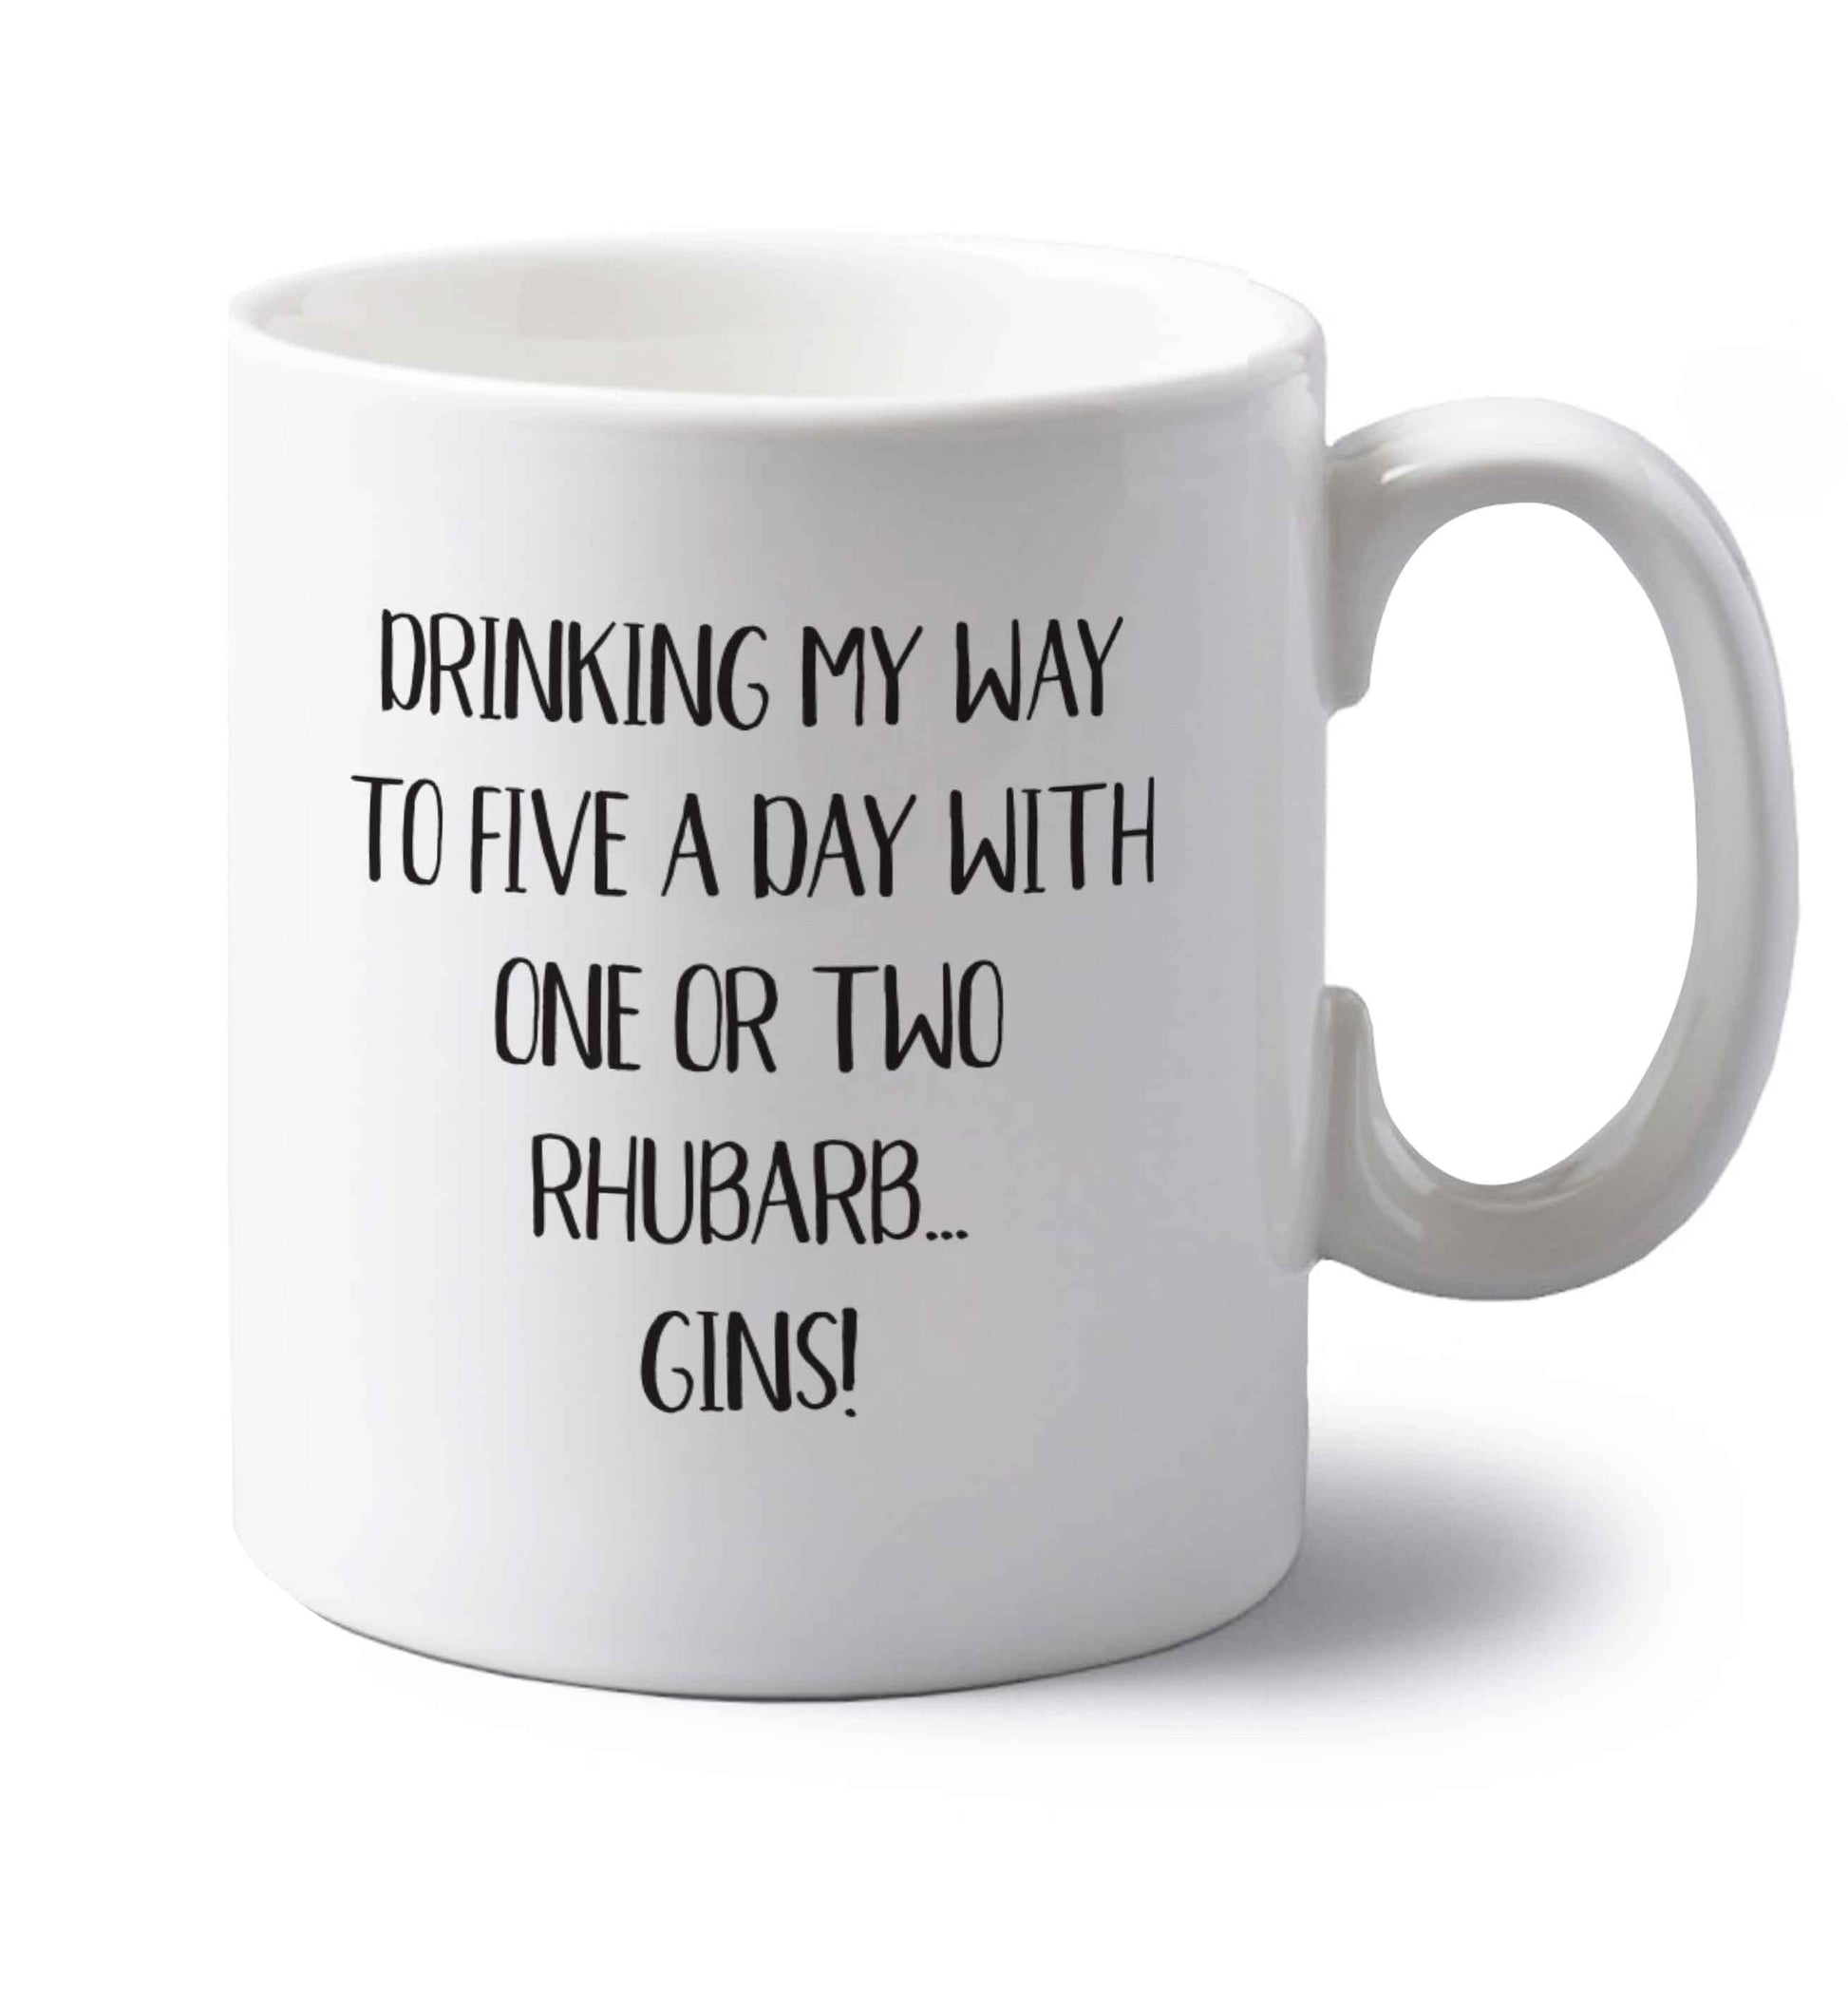 Drinking my way to five a day with one or two rhubarb gins left handed white ceramic mug 